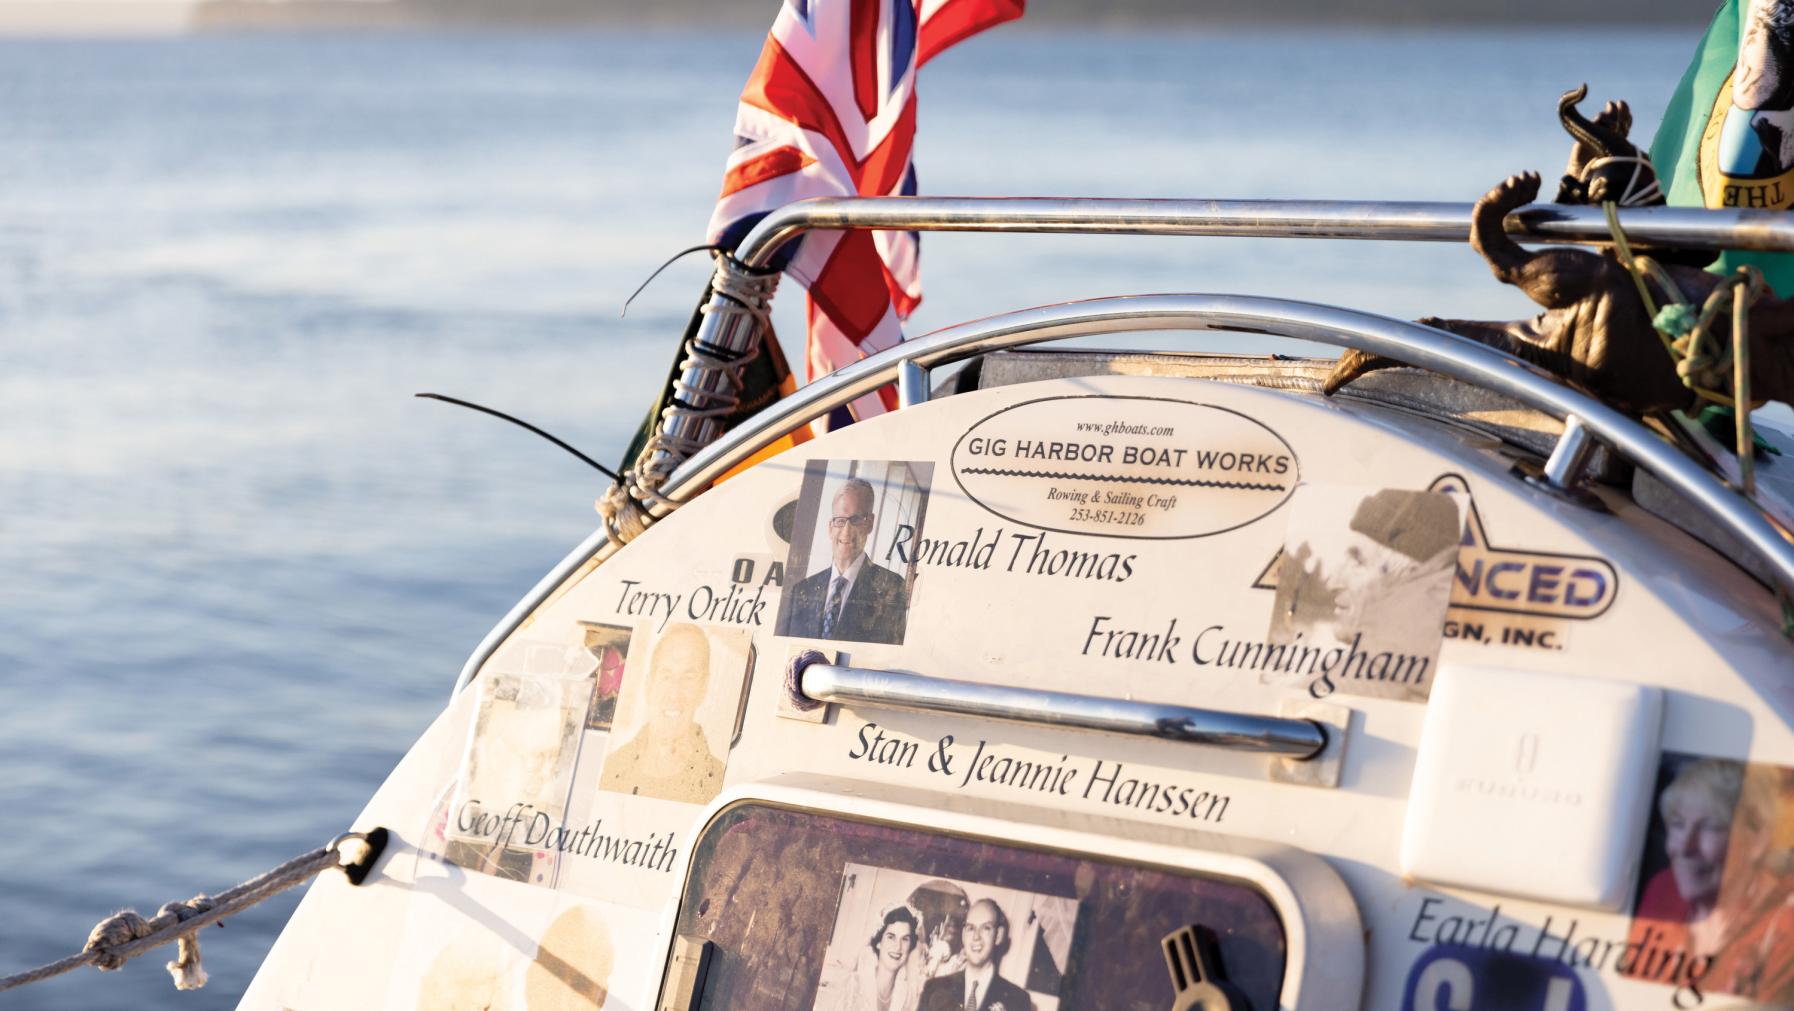 The rowboat was decorated with inspirational photos, including one of former Puget Sound President Ron Thomas. Photo by Alex Crook.